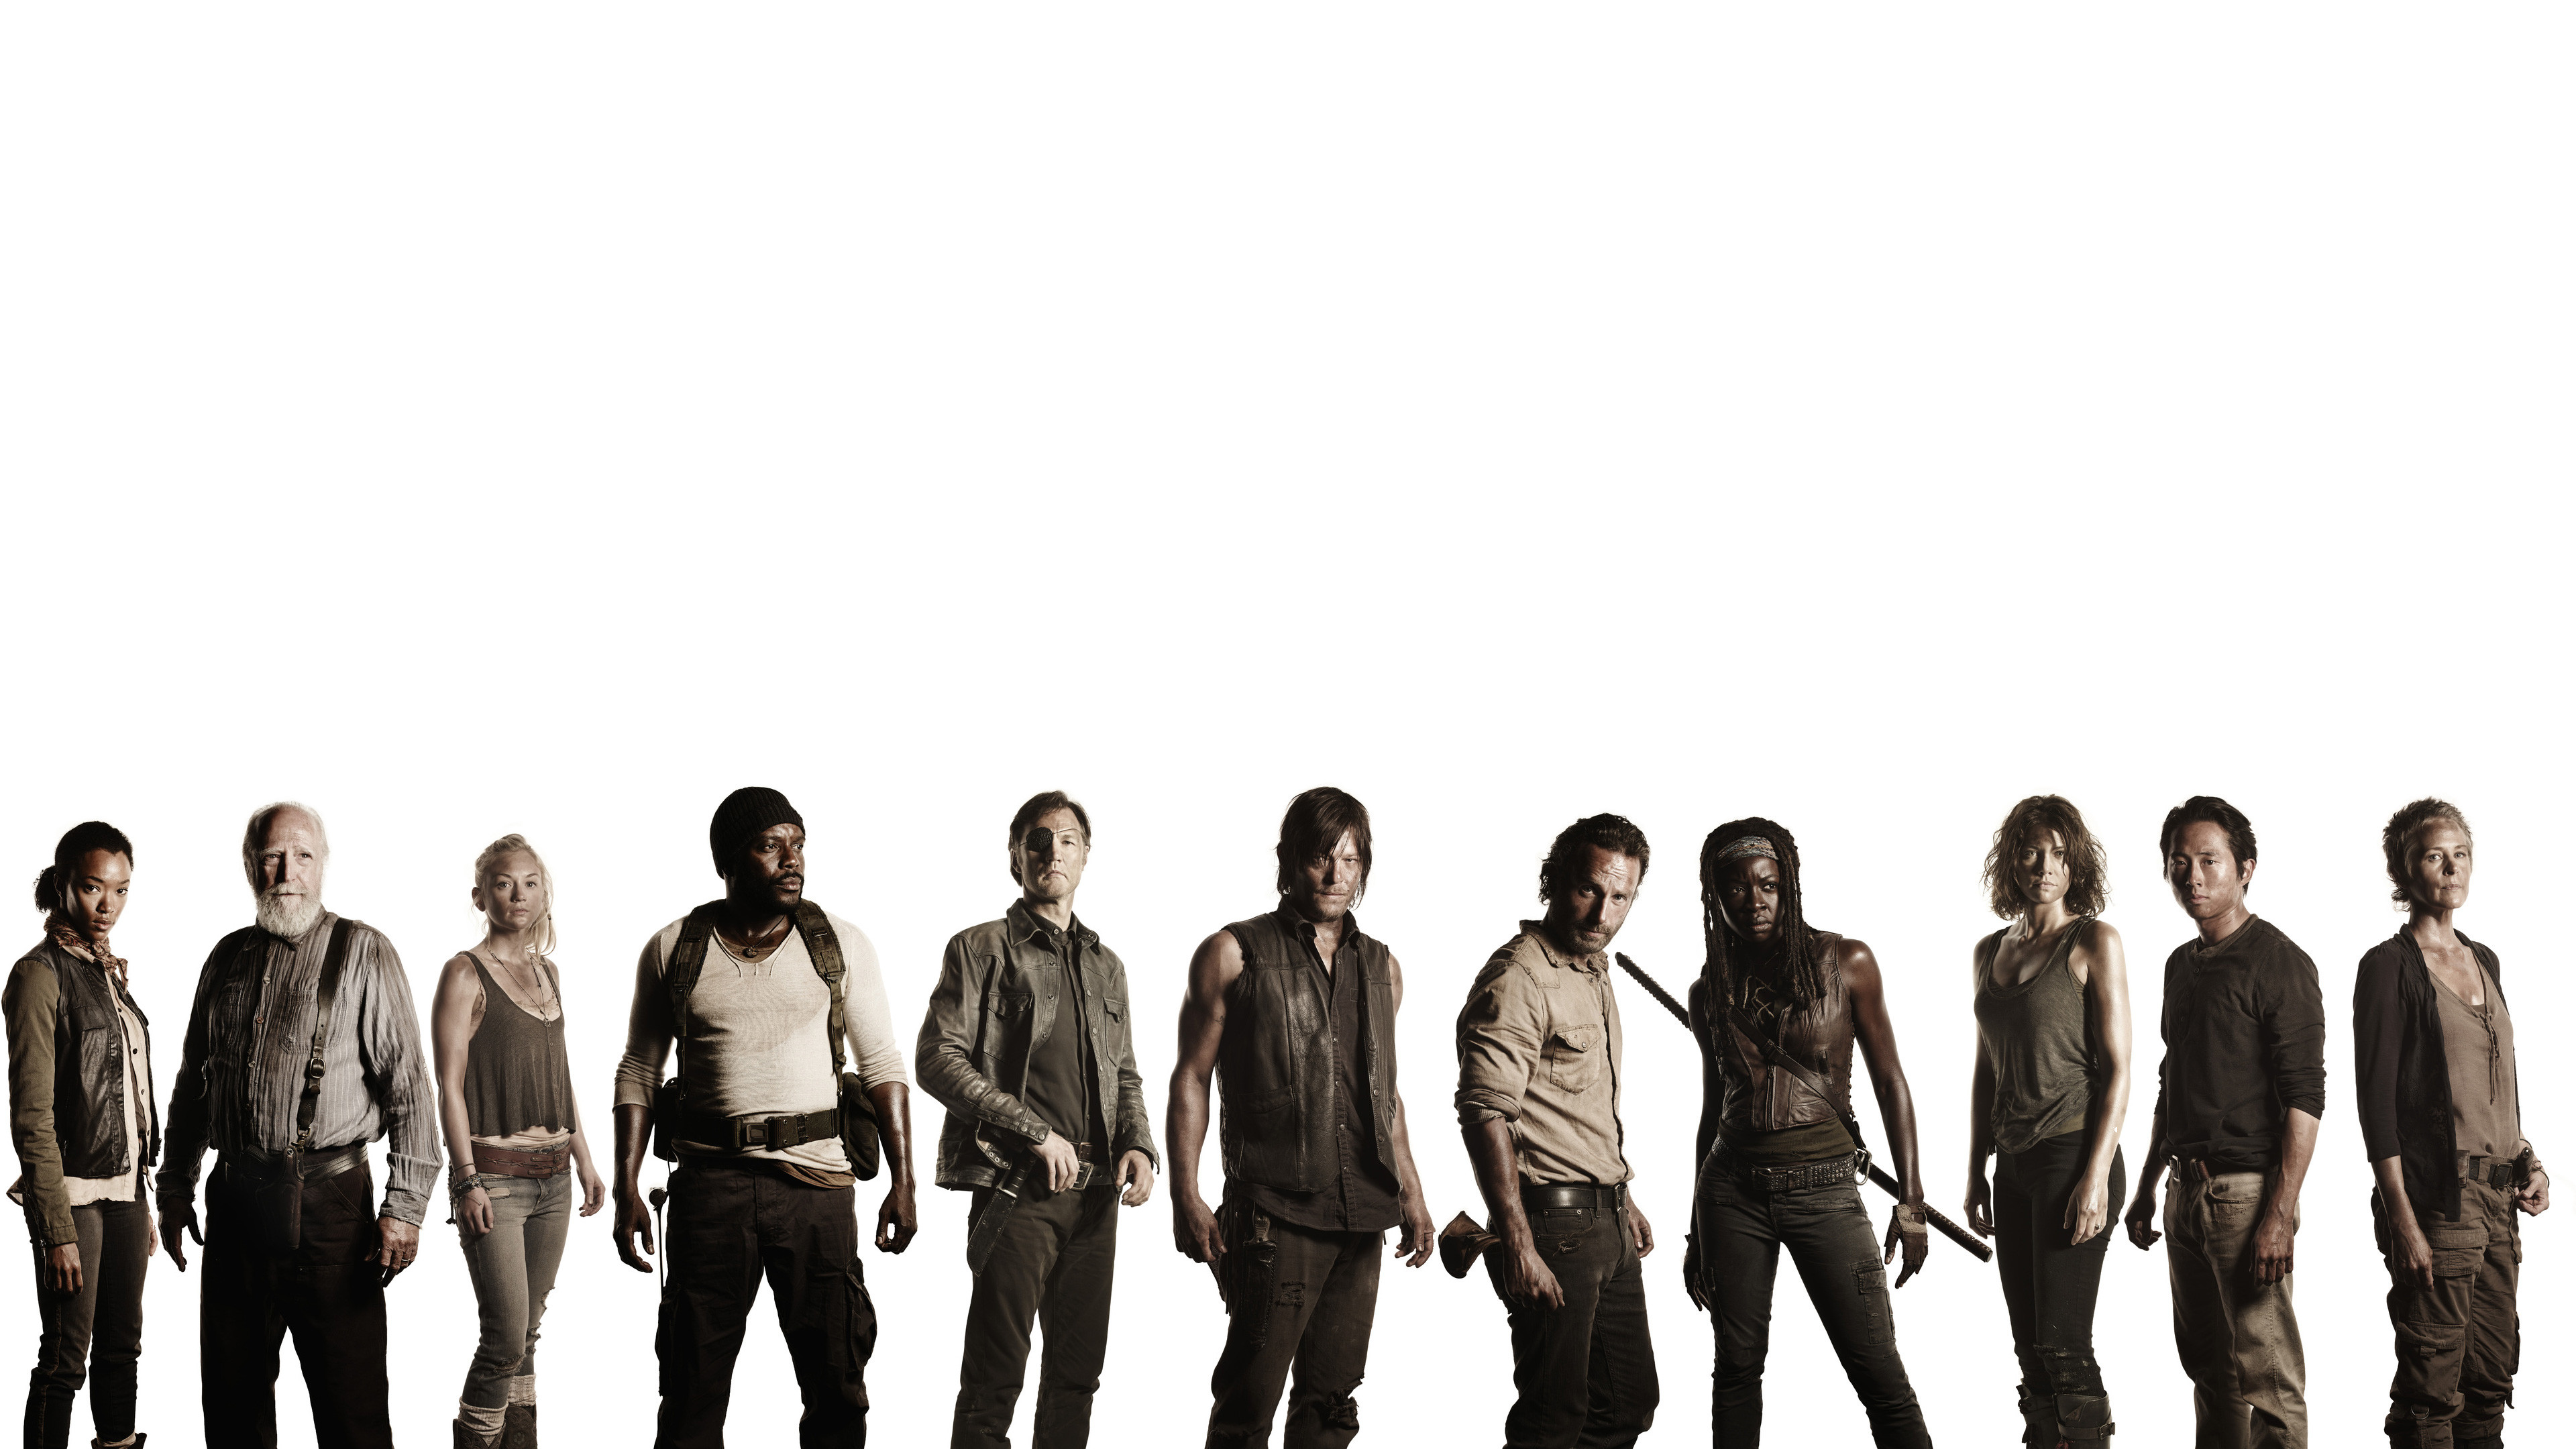 3840x2160 Walking Dead Cast 4K - This HD Walking Dead Cast 4K wallpaper is based on The  Walking Dead N/A. It released on N/A and starring Andrew Lincoln, ...